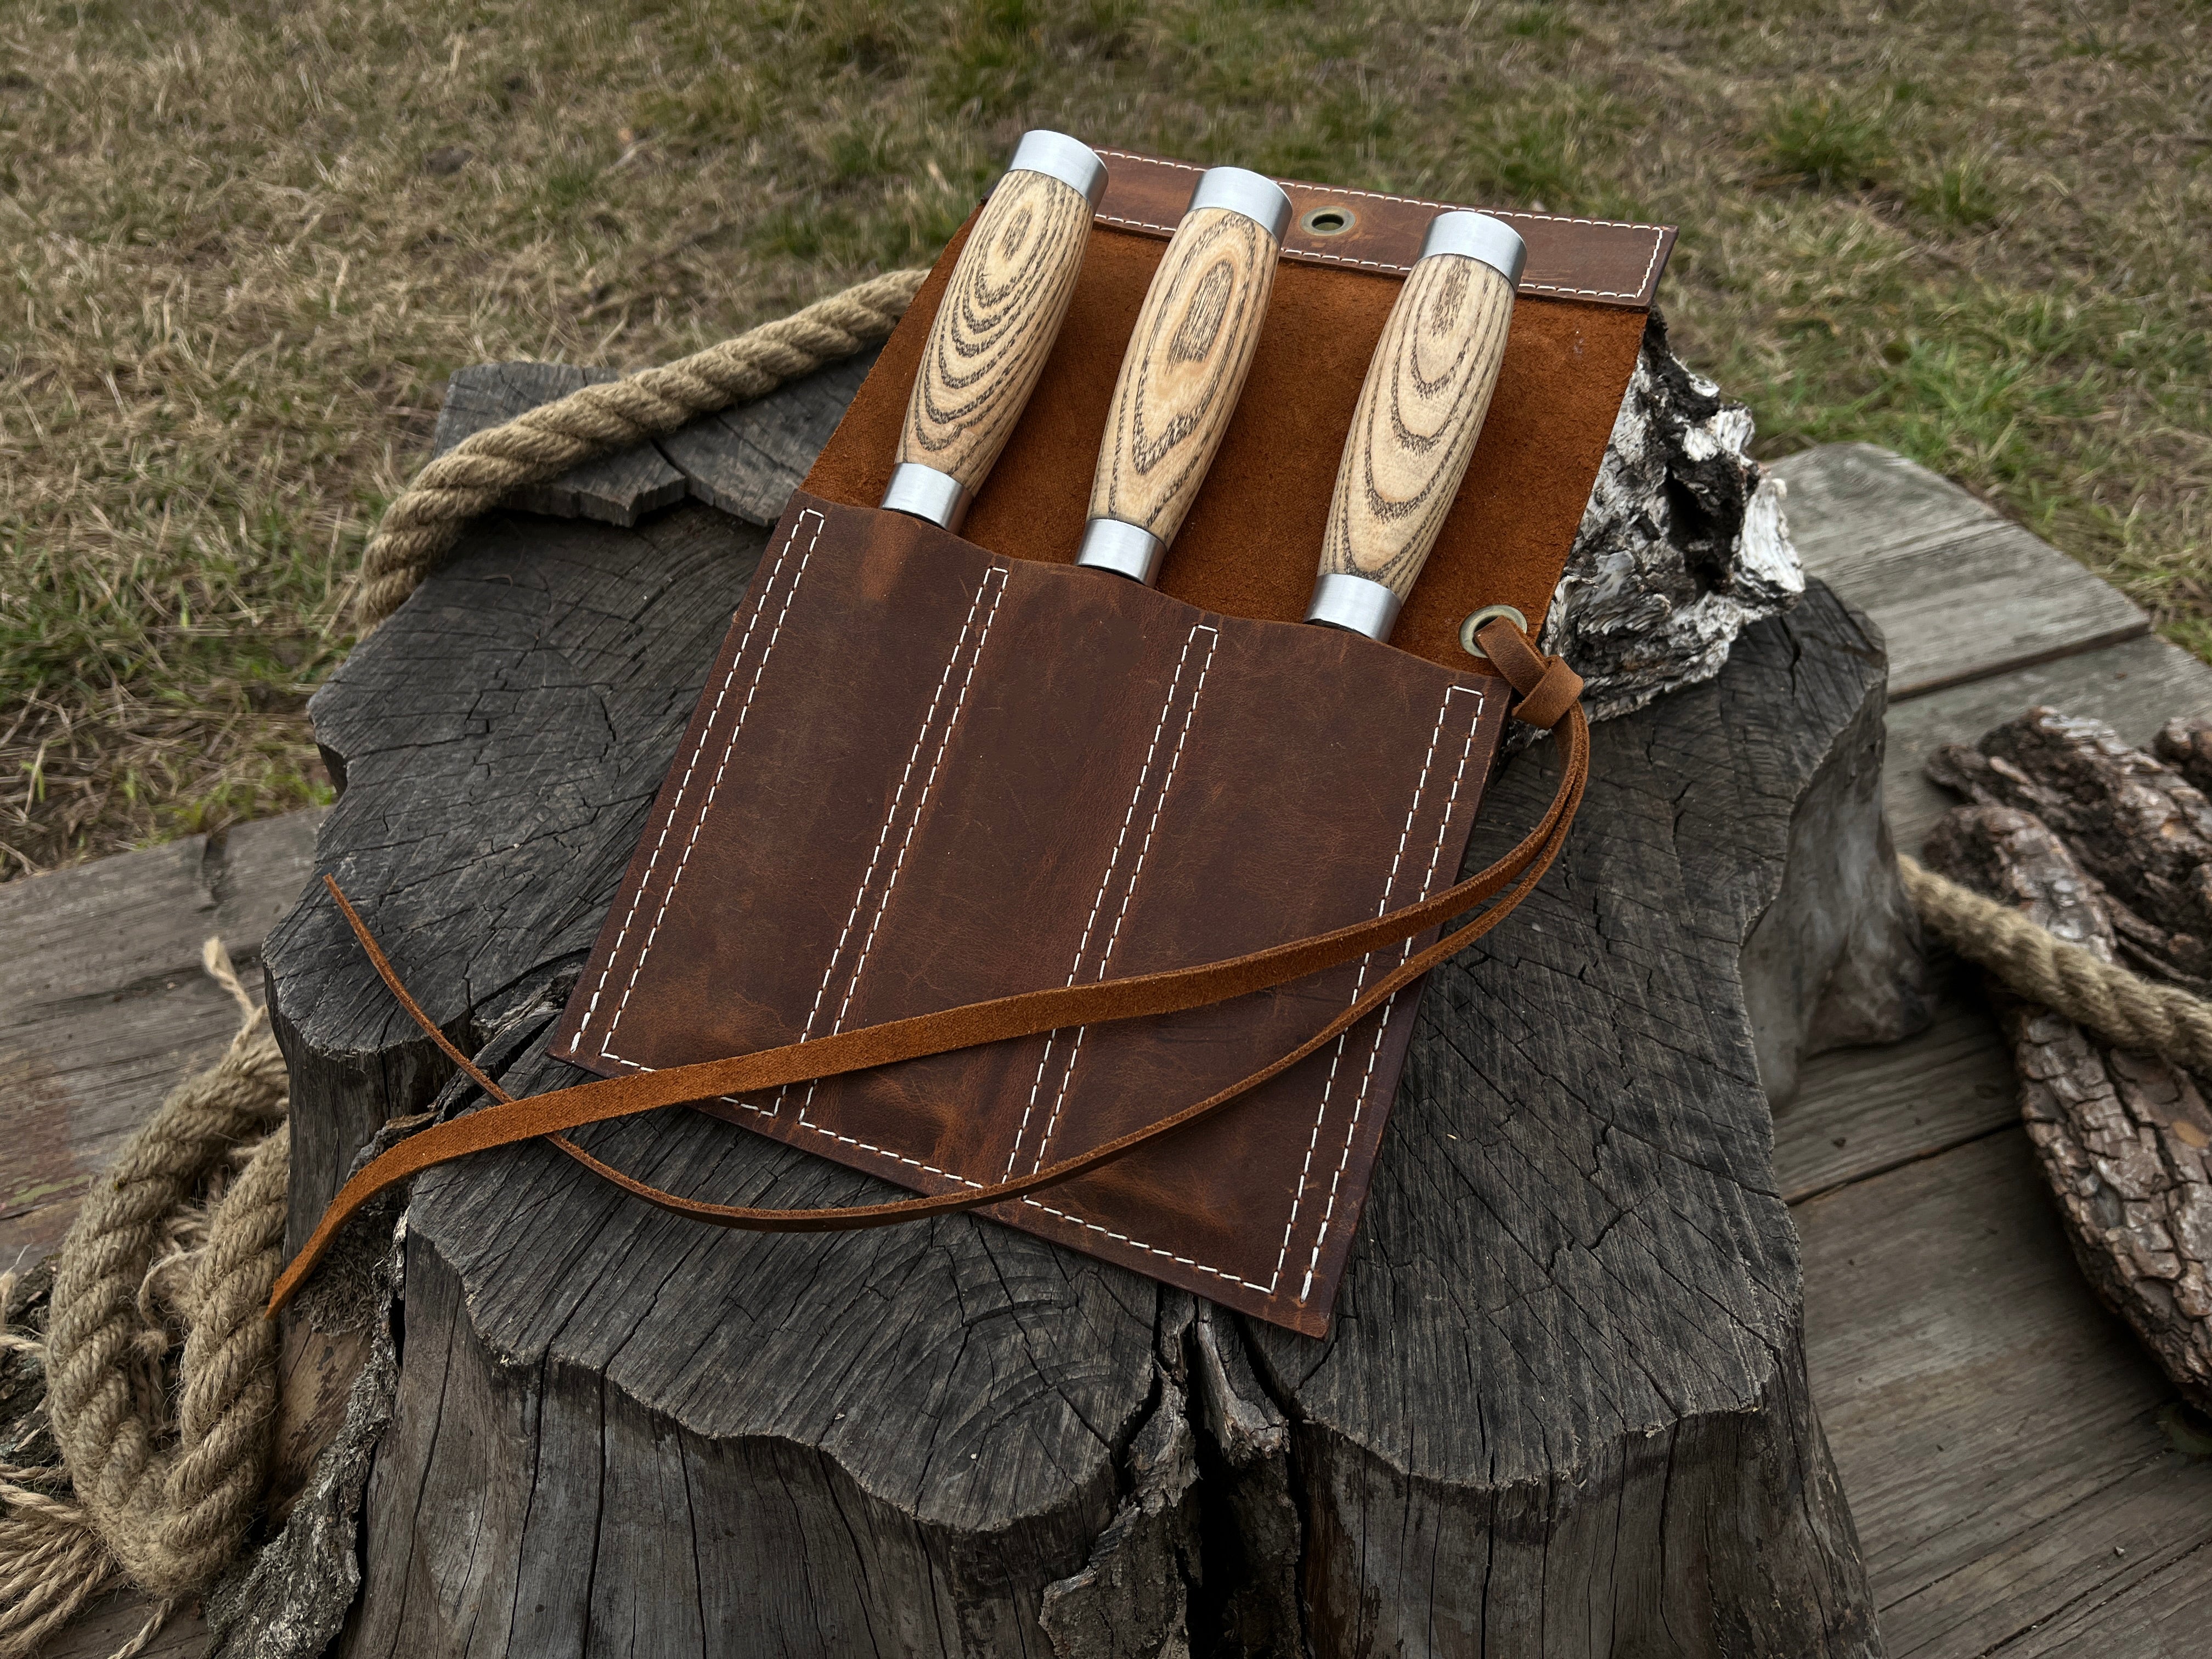 3-Piece Hand-Forged Wood Carving Chisels Set